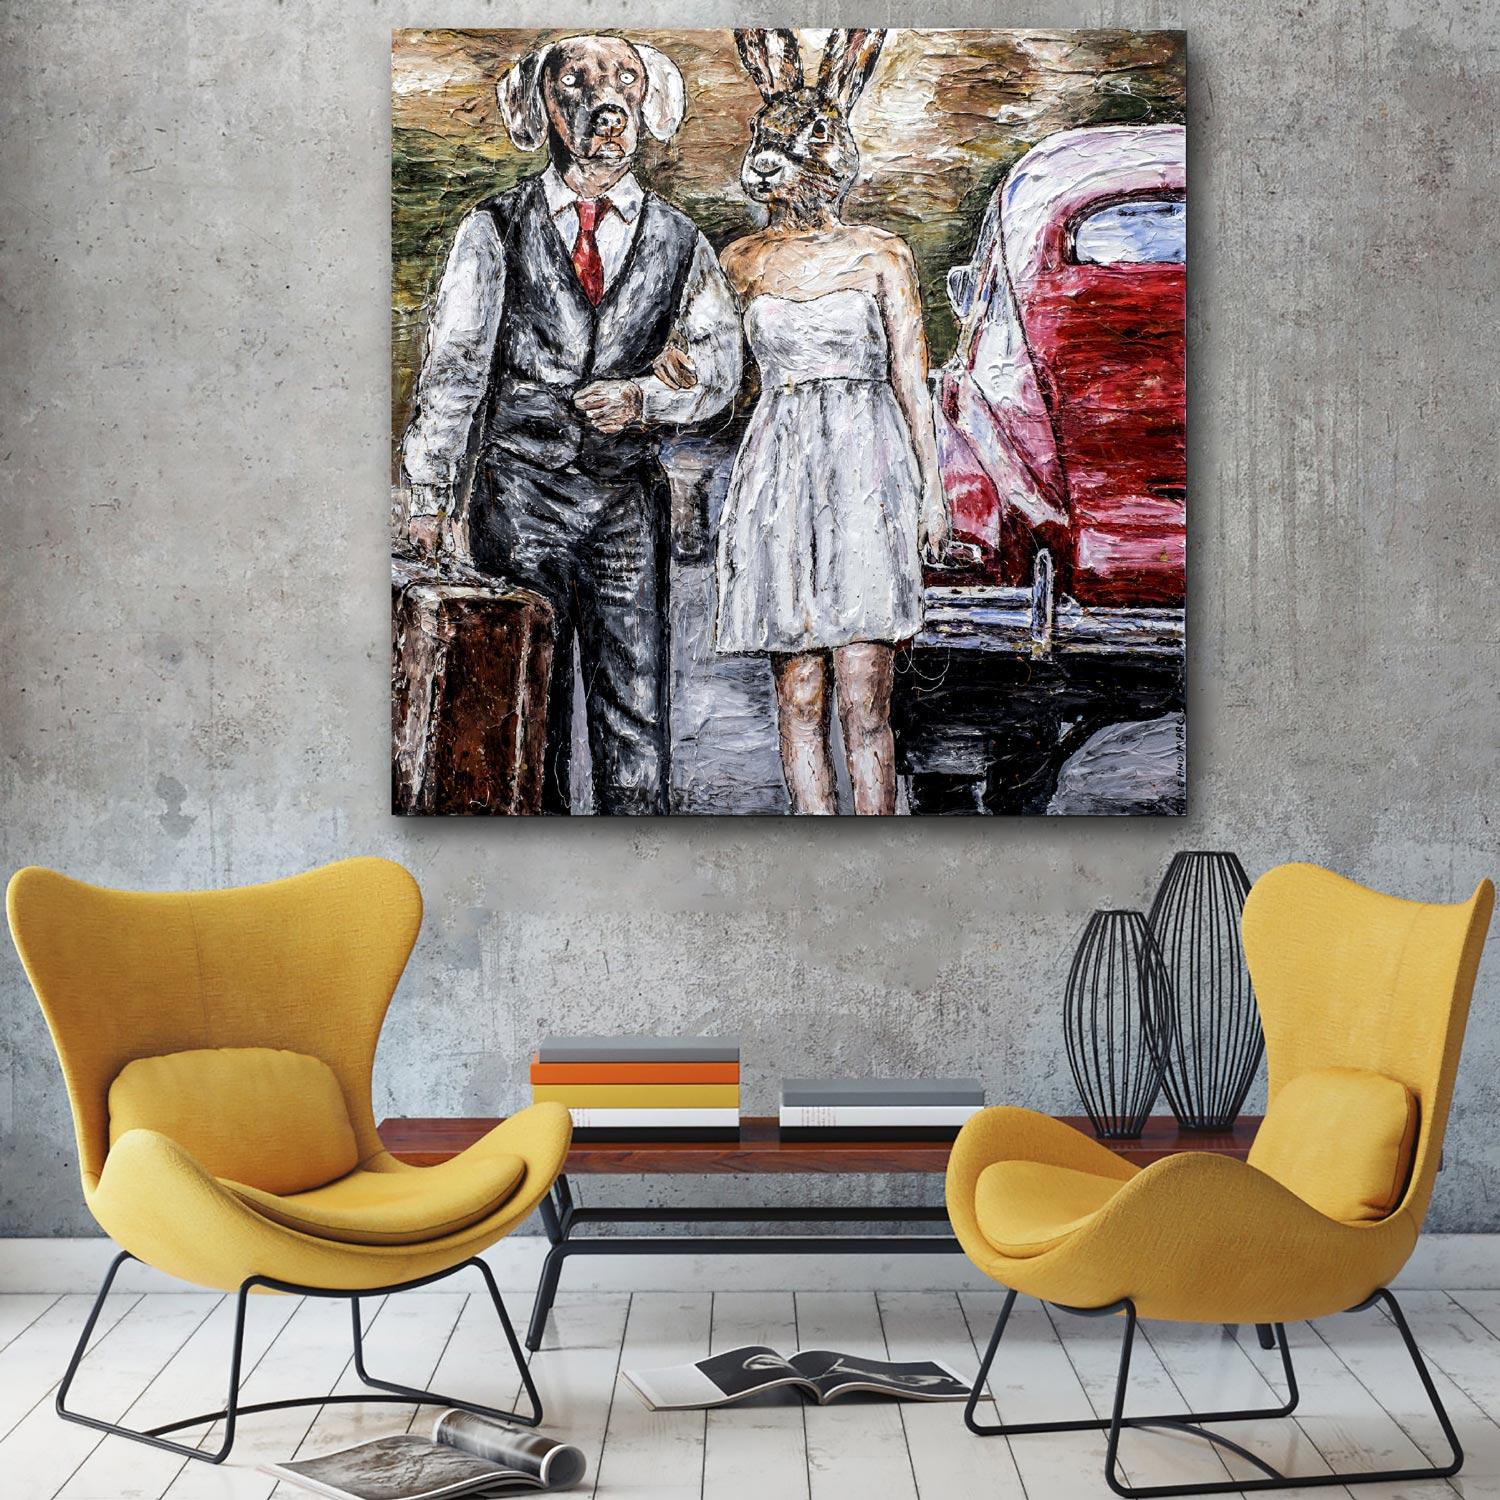 Title: They were going on an adventure that would last a lifetime
Thick Texture Painting Series - Original Painting - Acrylic on Canvas

World Famous Contemporary Artists: Husband and wife team, Gillie and Marc, are New York and Sydney-based